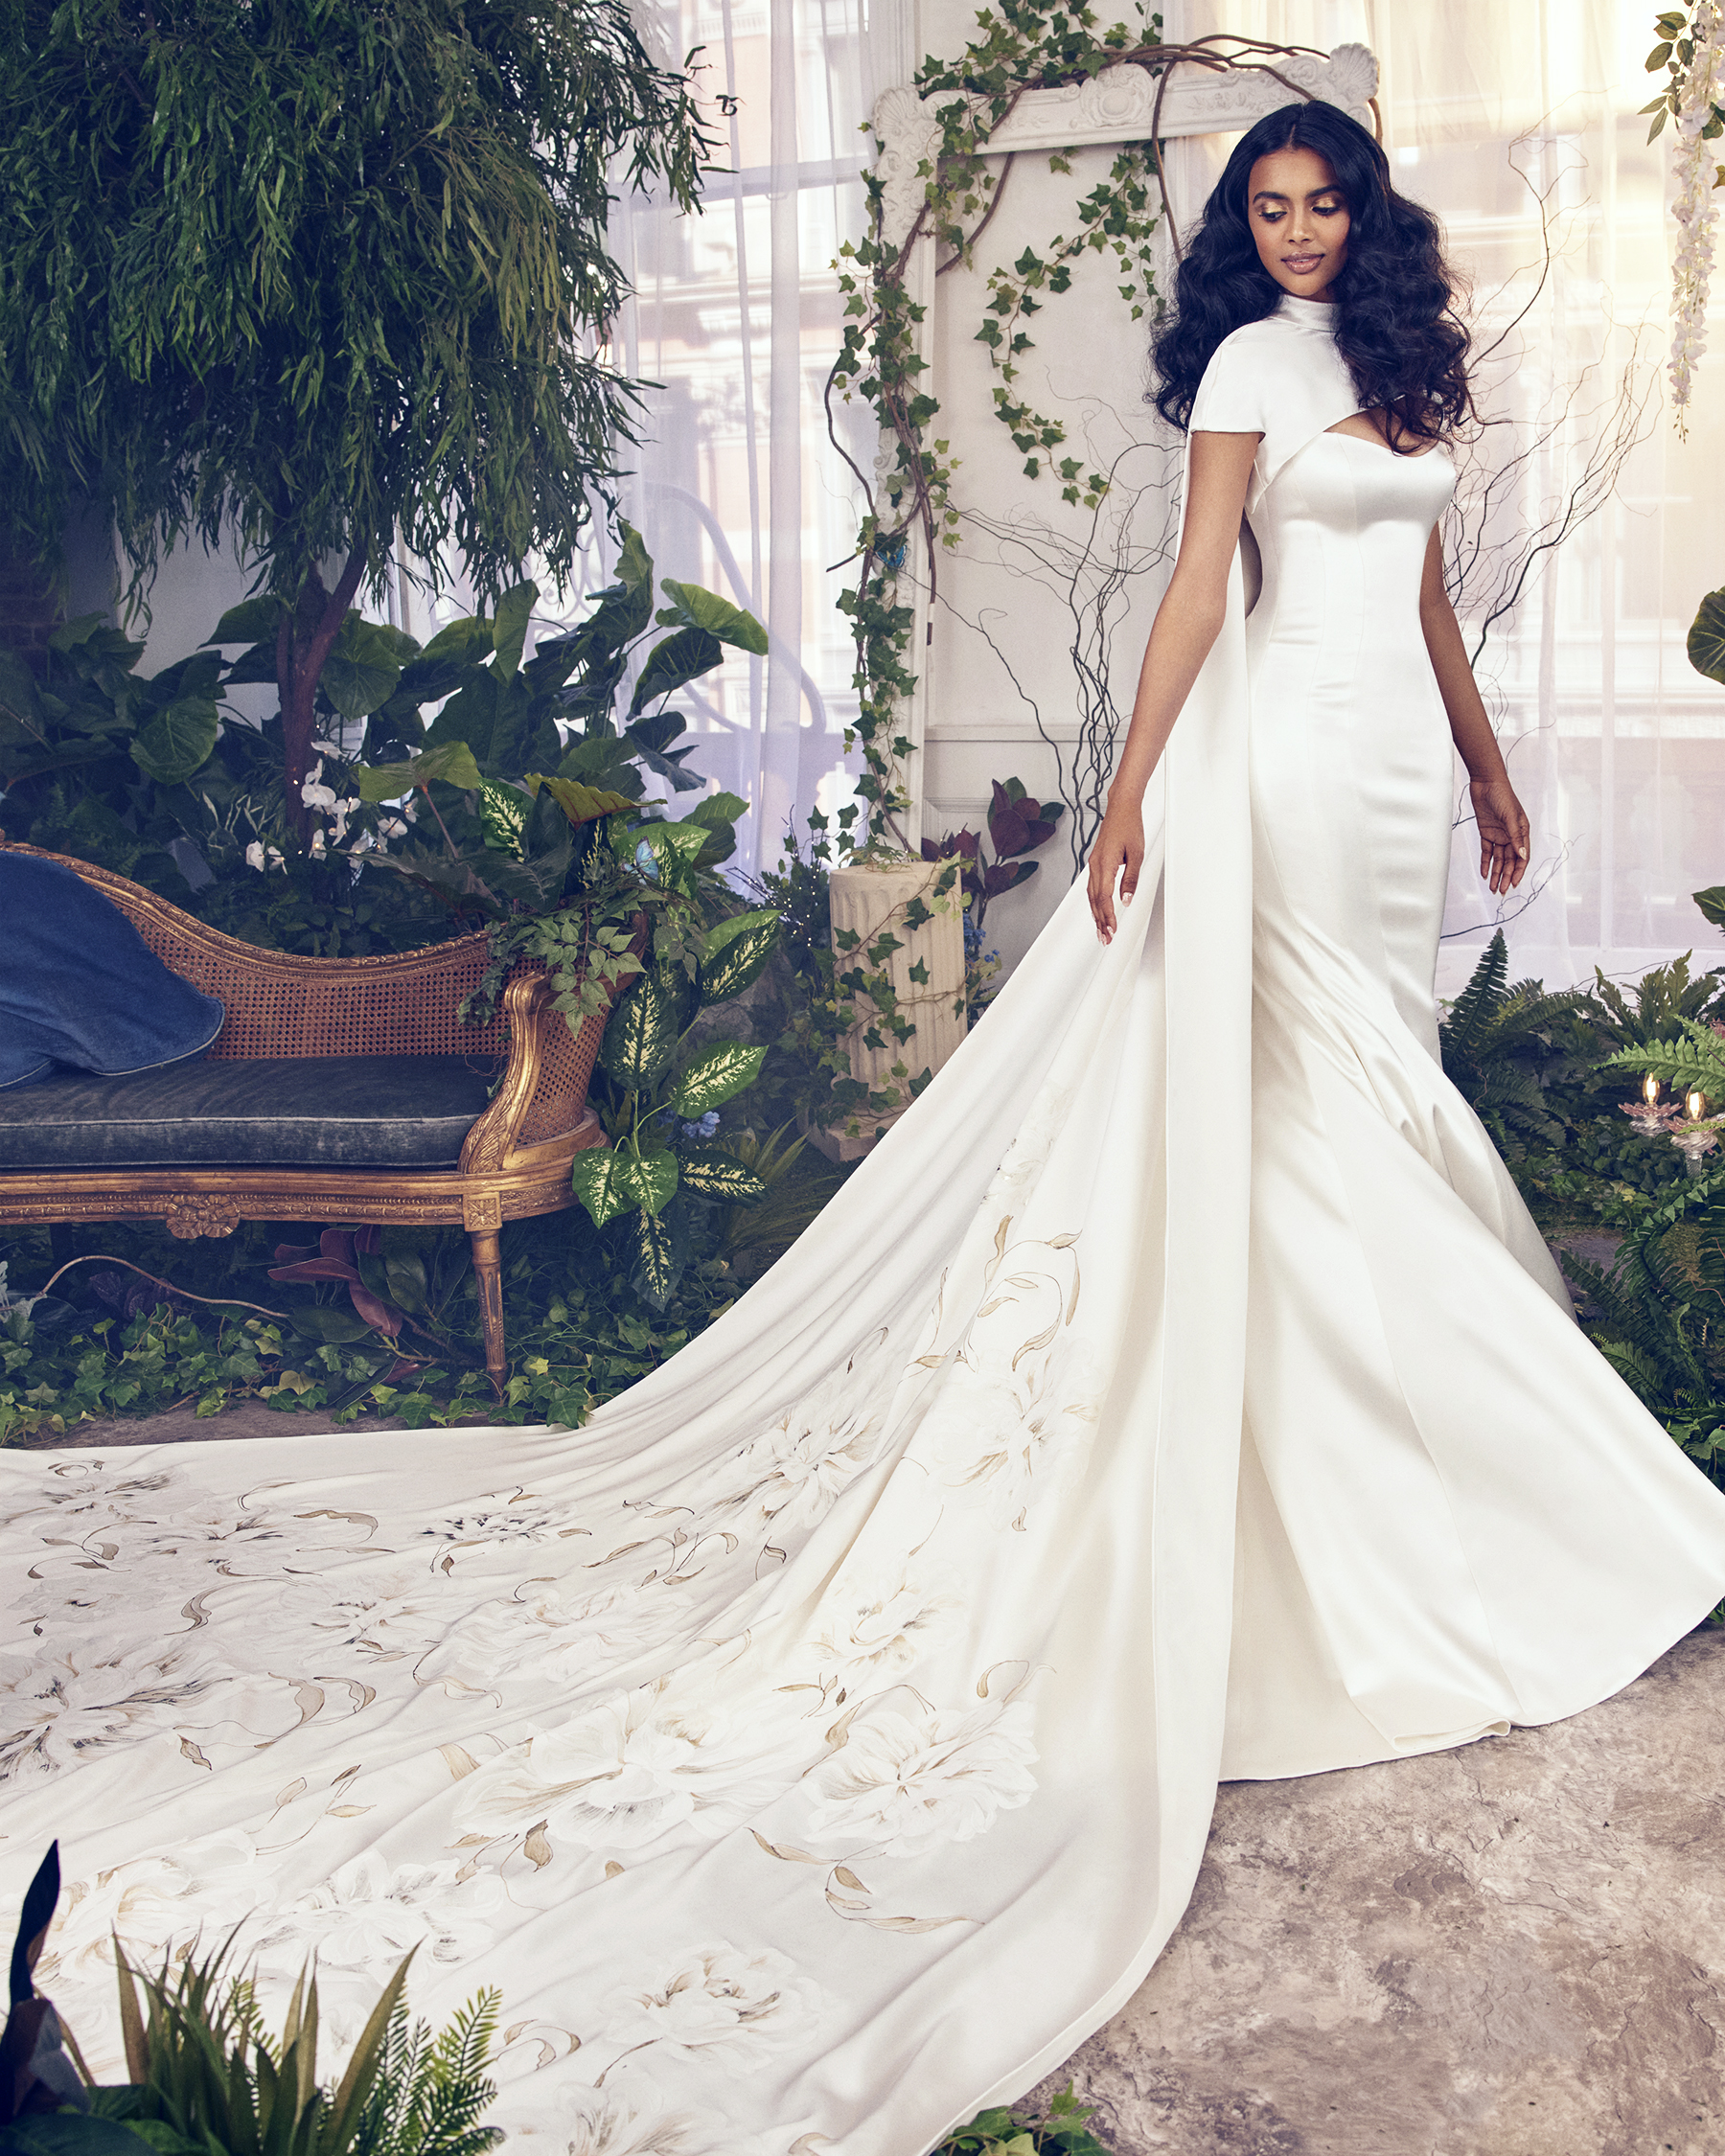 Best and Worst Wedding Dresses for Your Short-Waisted Body Type